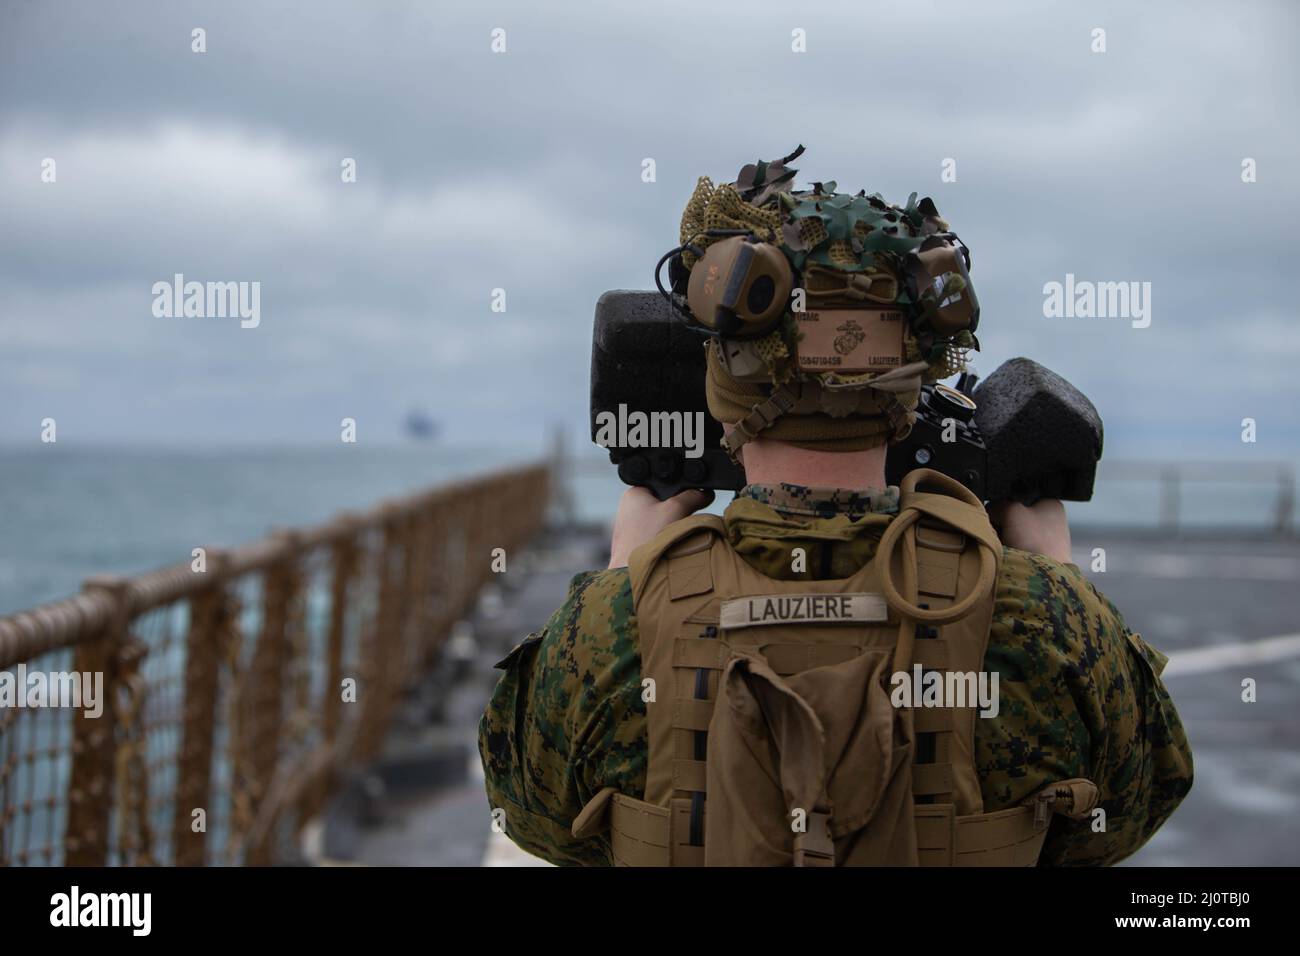 U.S. Marine Corps Lance Cpl.  Joshua Lauziere, an antitank missile man assigned to the 22nd Marine Expeditionary Unit (MEU), looks through the javelin guidance system during Composite Training Exercise (COMPTUEX) aboard amphibious docking landing ship USS Gunston Hall (LSD 44), Jan. 22, 2022. The 22nd MEU is underway for Composite Training Unit Exercise (COMPTUEX) in preparation for an upcoming deployment. COMPTUEX is the last at-sea period in the MEU’s Predeployment Training Program; it aims to test the capabilities of the Navy Marine Corps team and achieve deployment certification.  (U.S. Ma Stock Photo